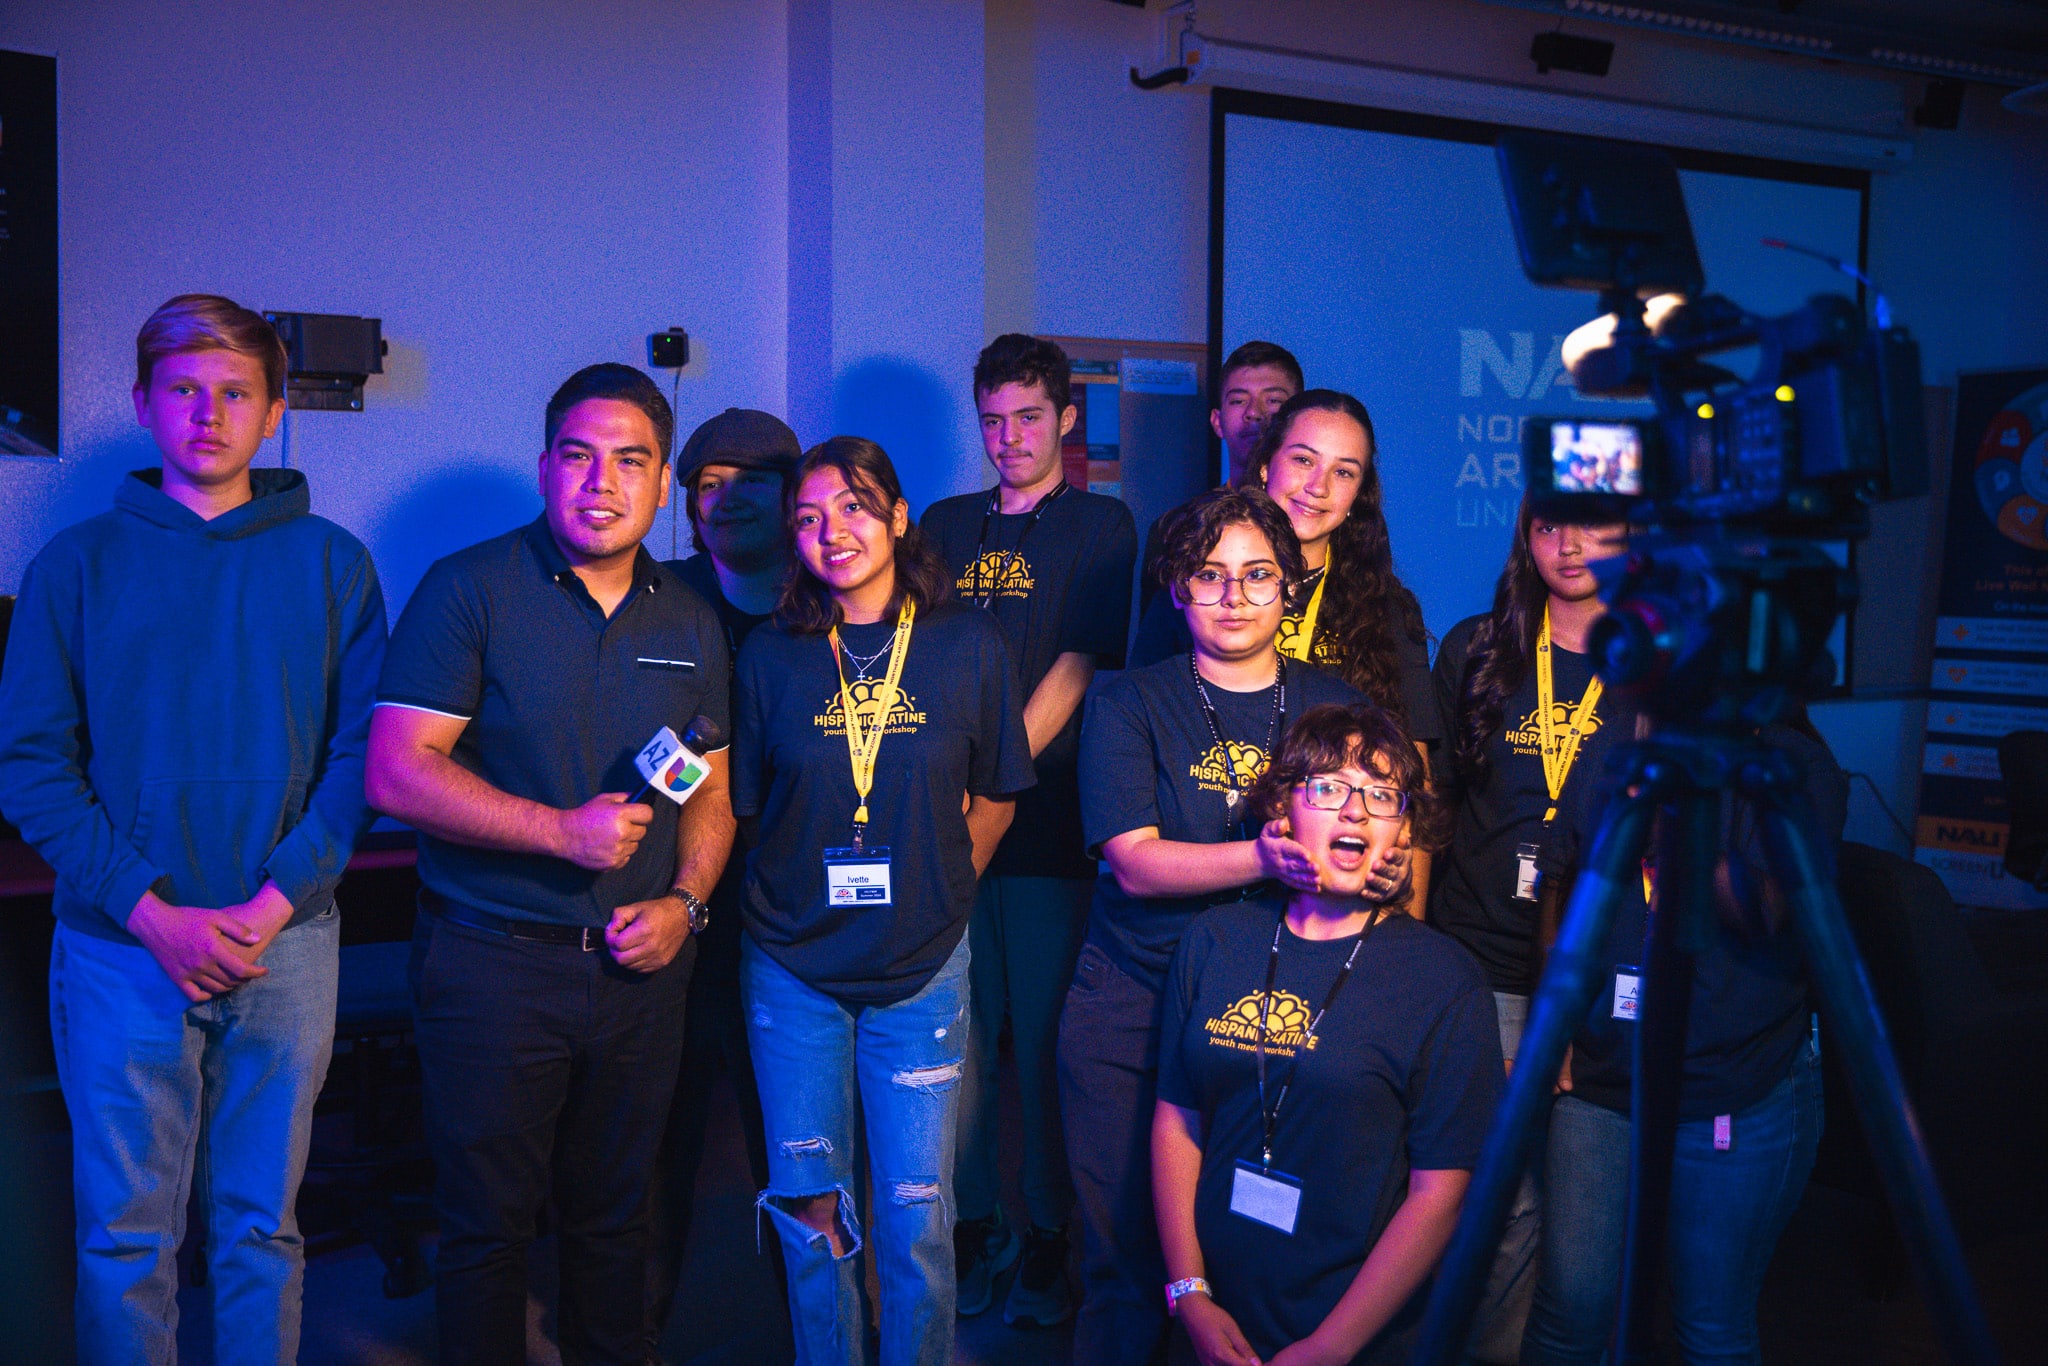 Univision reporter Hector Lagunas and Flagstaff Unified School District students pose with a video camera in a blue room.